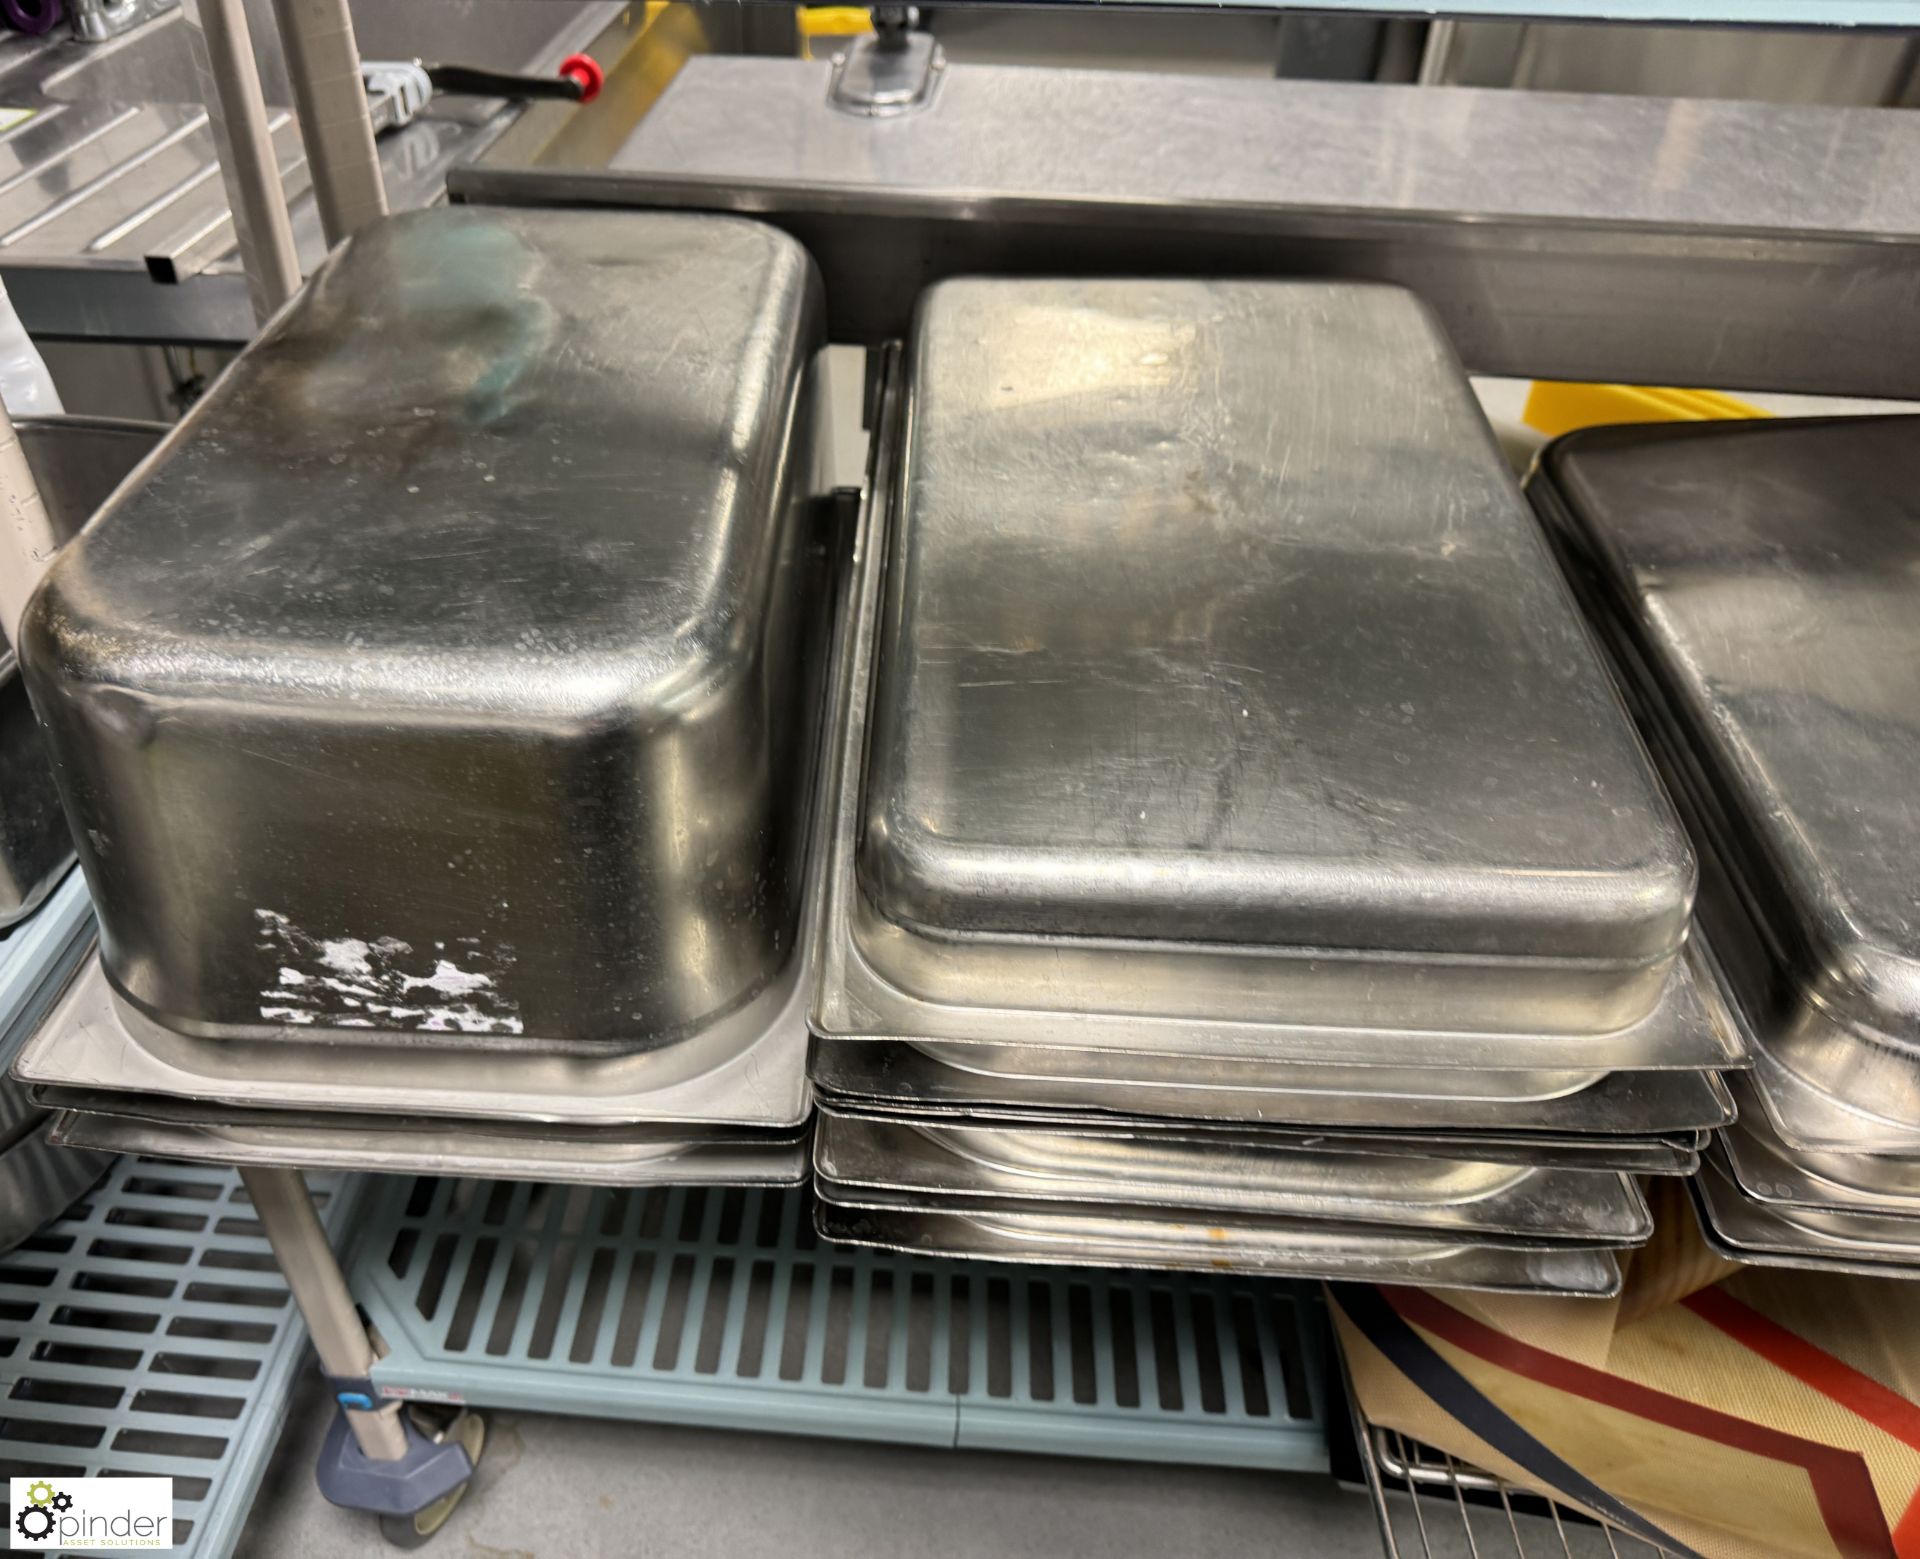 Large quantity Cooking Trays, etc, to rack (rack not included) (location in building – basement - Bild 7 aus 9